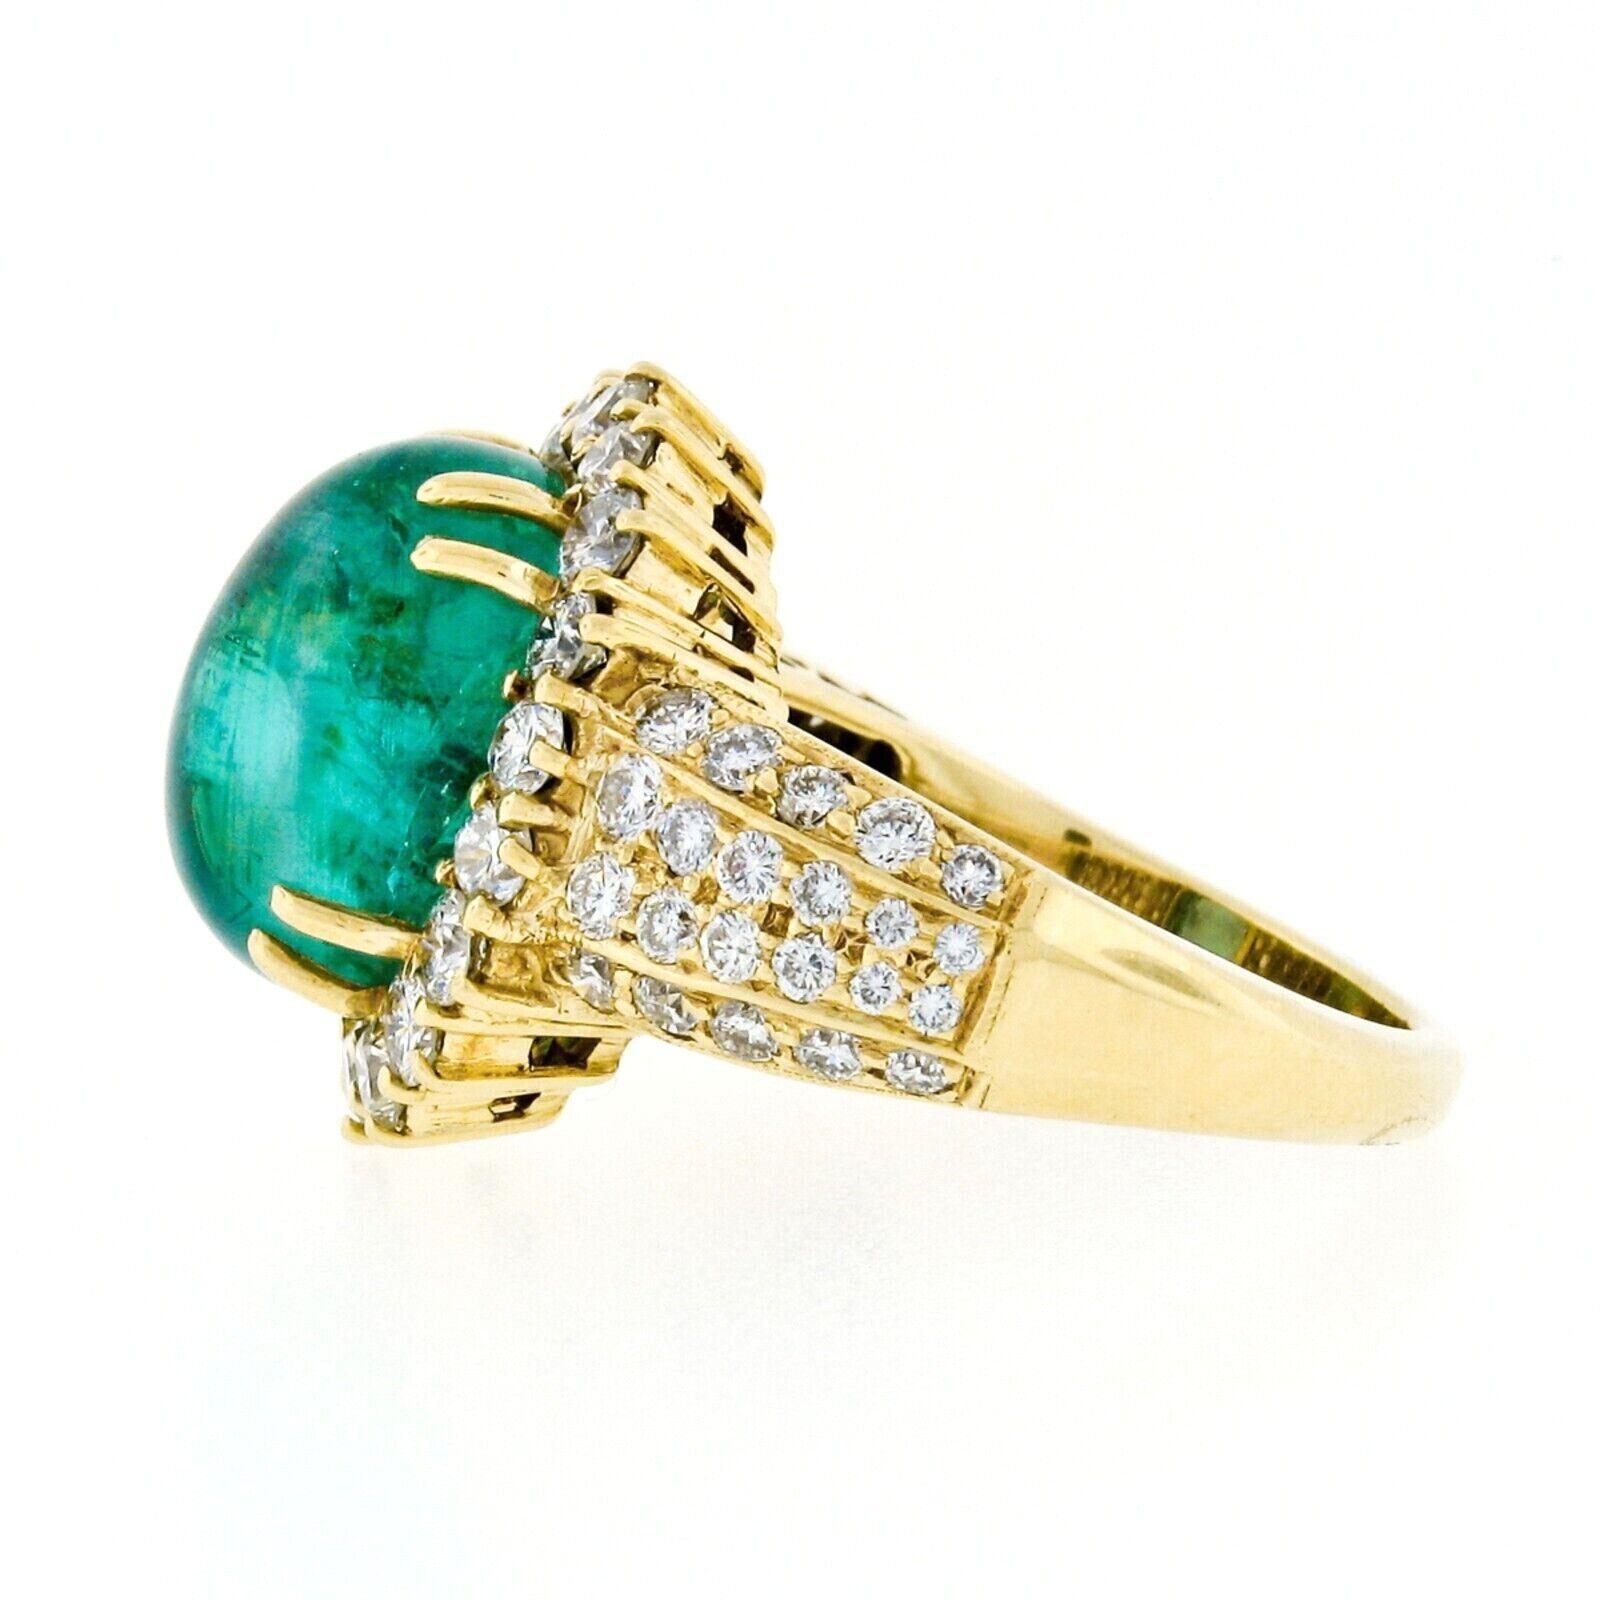 Women's Vintage 18k Gold 8.58ct AGL Oval Cabochon Emerald and Pave Diamond Cocktail Ring For Sale